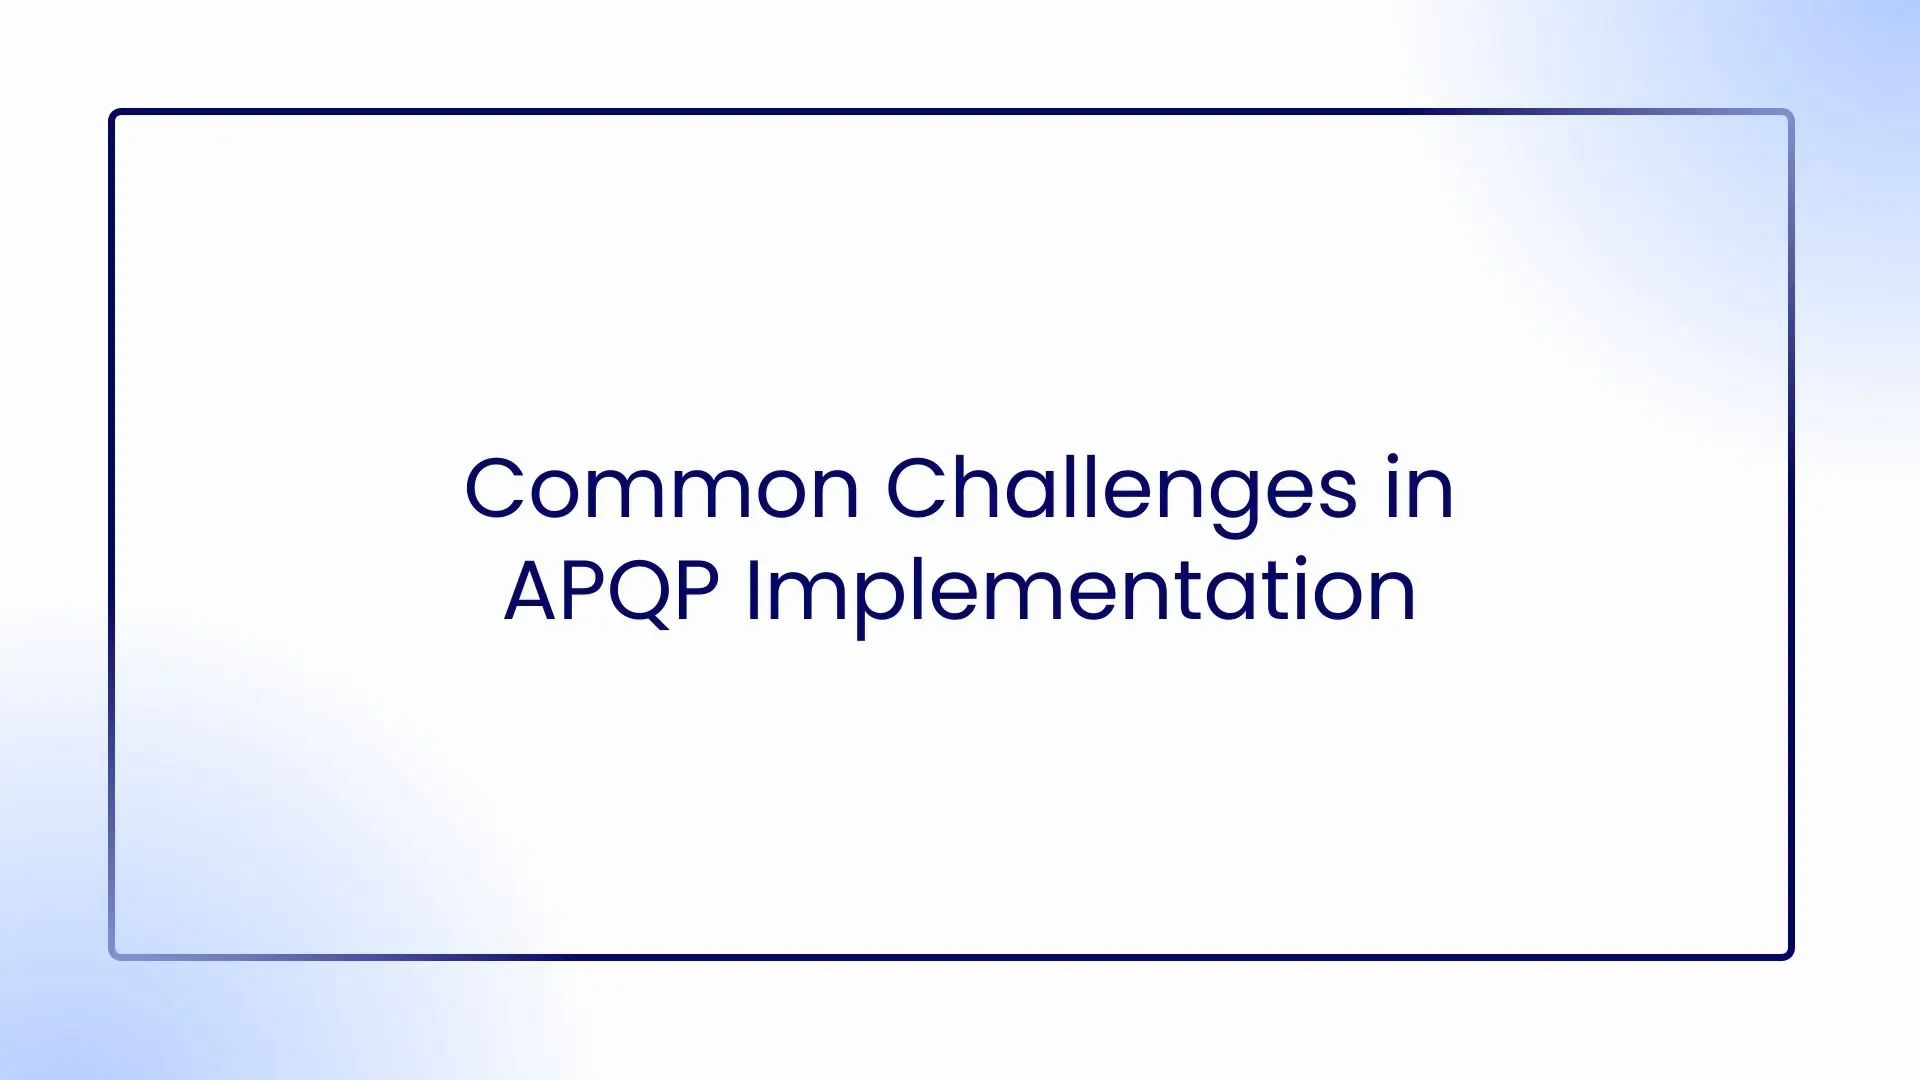 A diagram of the common challenges in APQP implementation